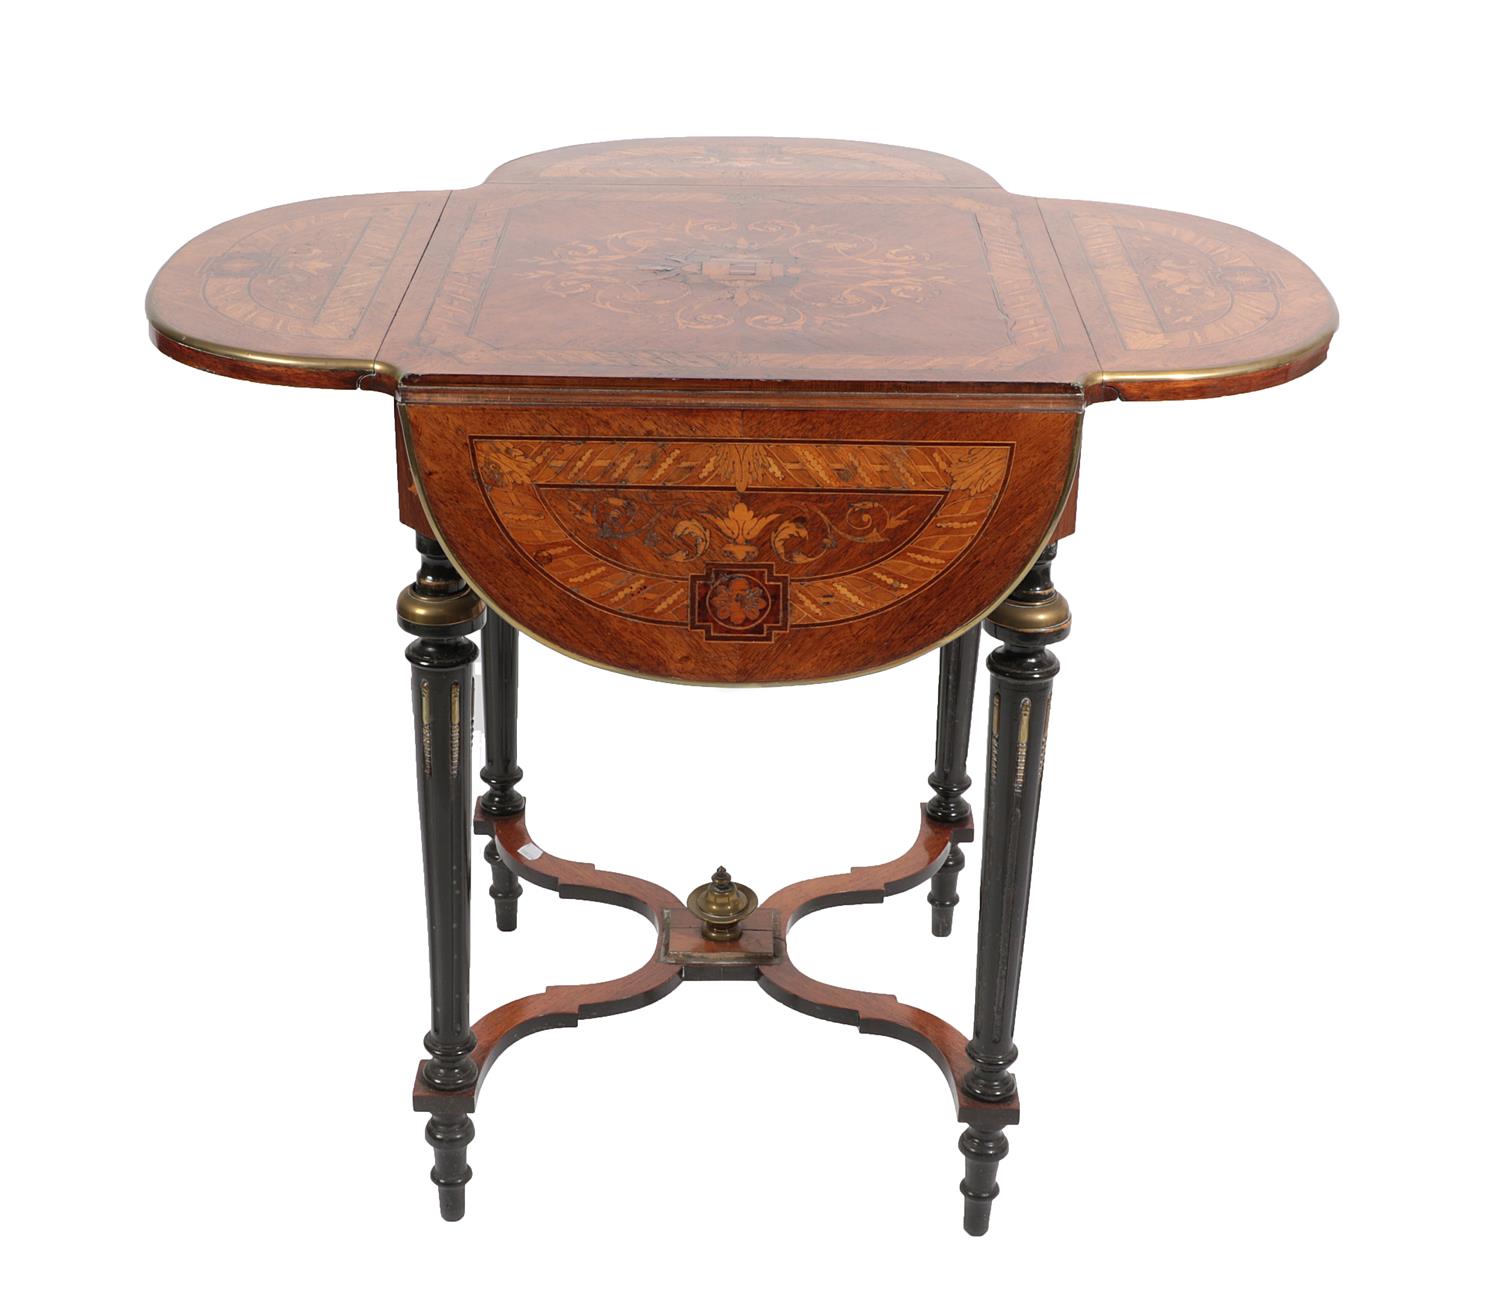 Lot 637 - A French Ormolu Mounted, Ebonised, Amboyna and Marquetry Inlaid Dropleaf Table, late 19th/early...